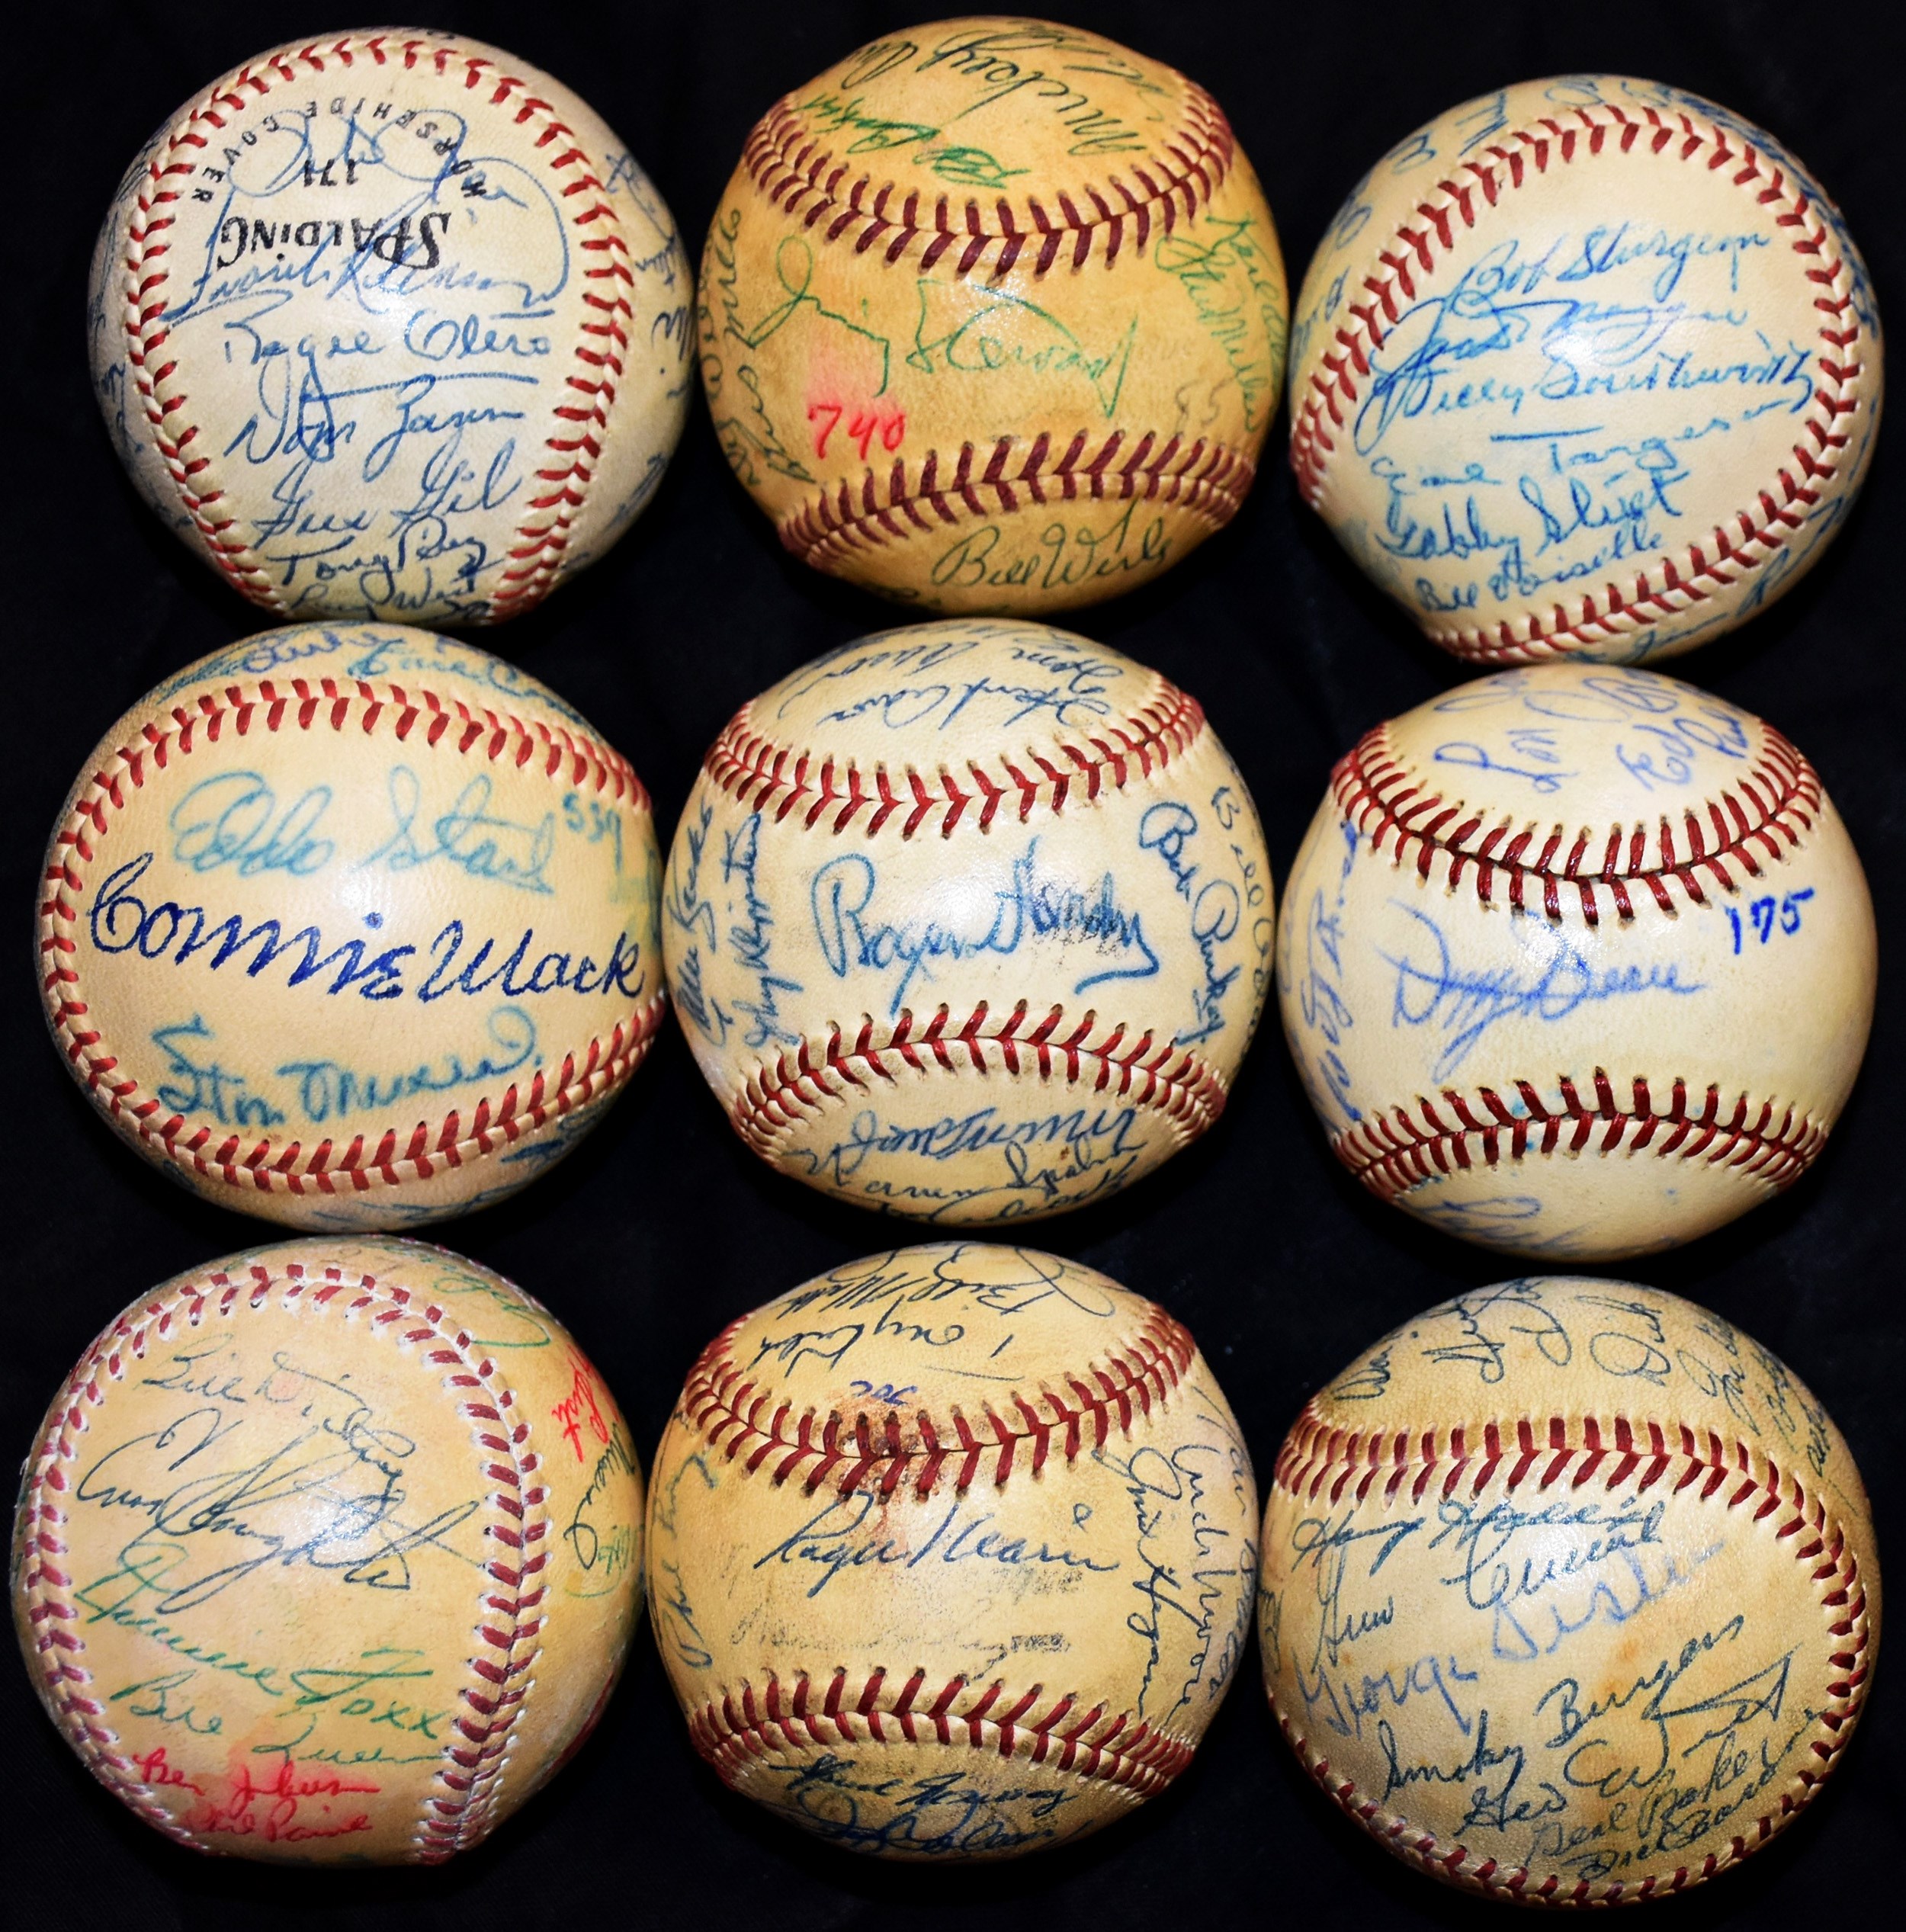 - Treasure Trove of Vintage Team-Signed Baseballs with MAJOR Names Inc: Foxx & Hornsby (225+)